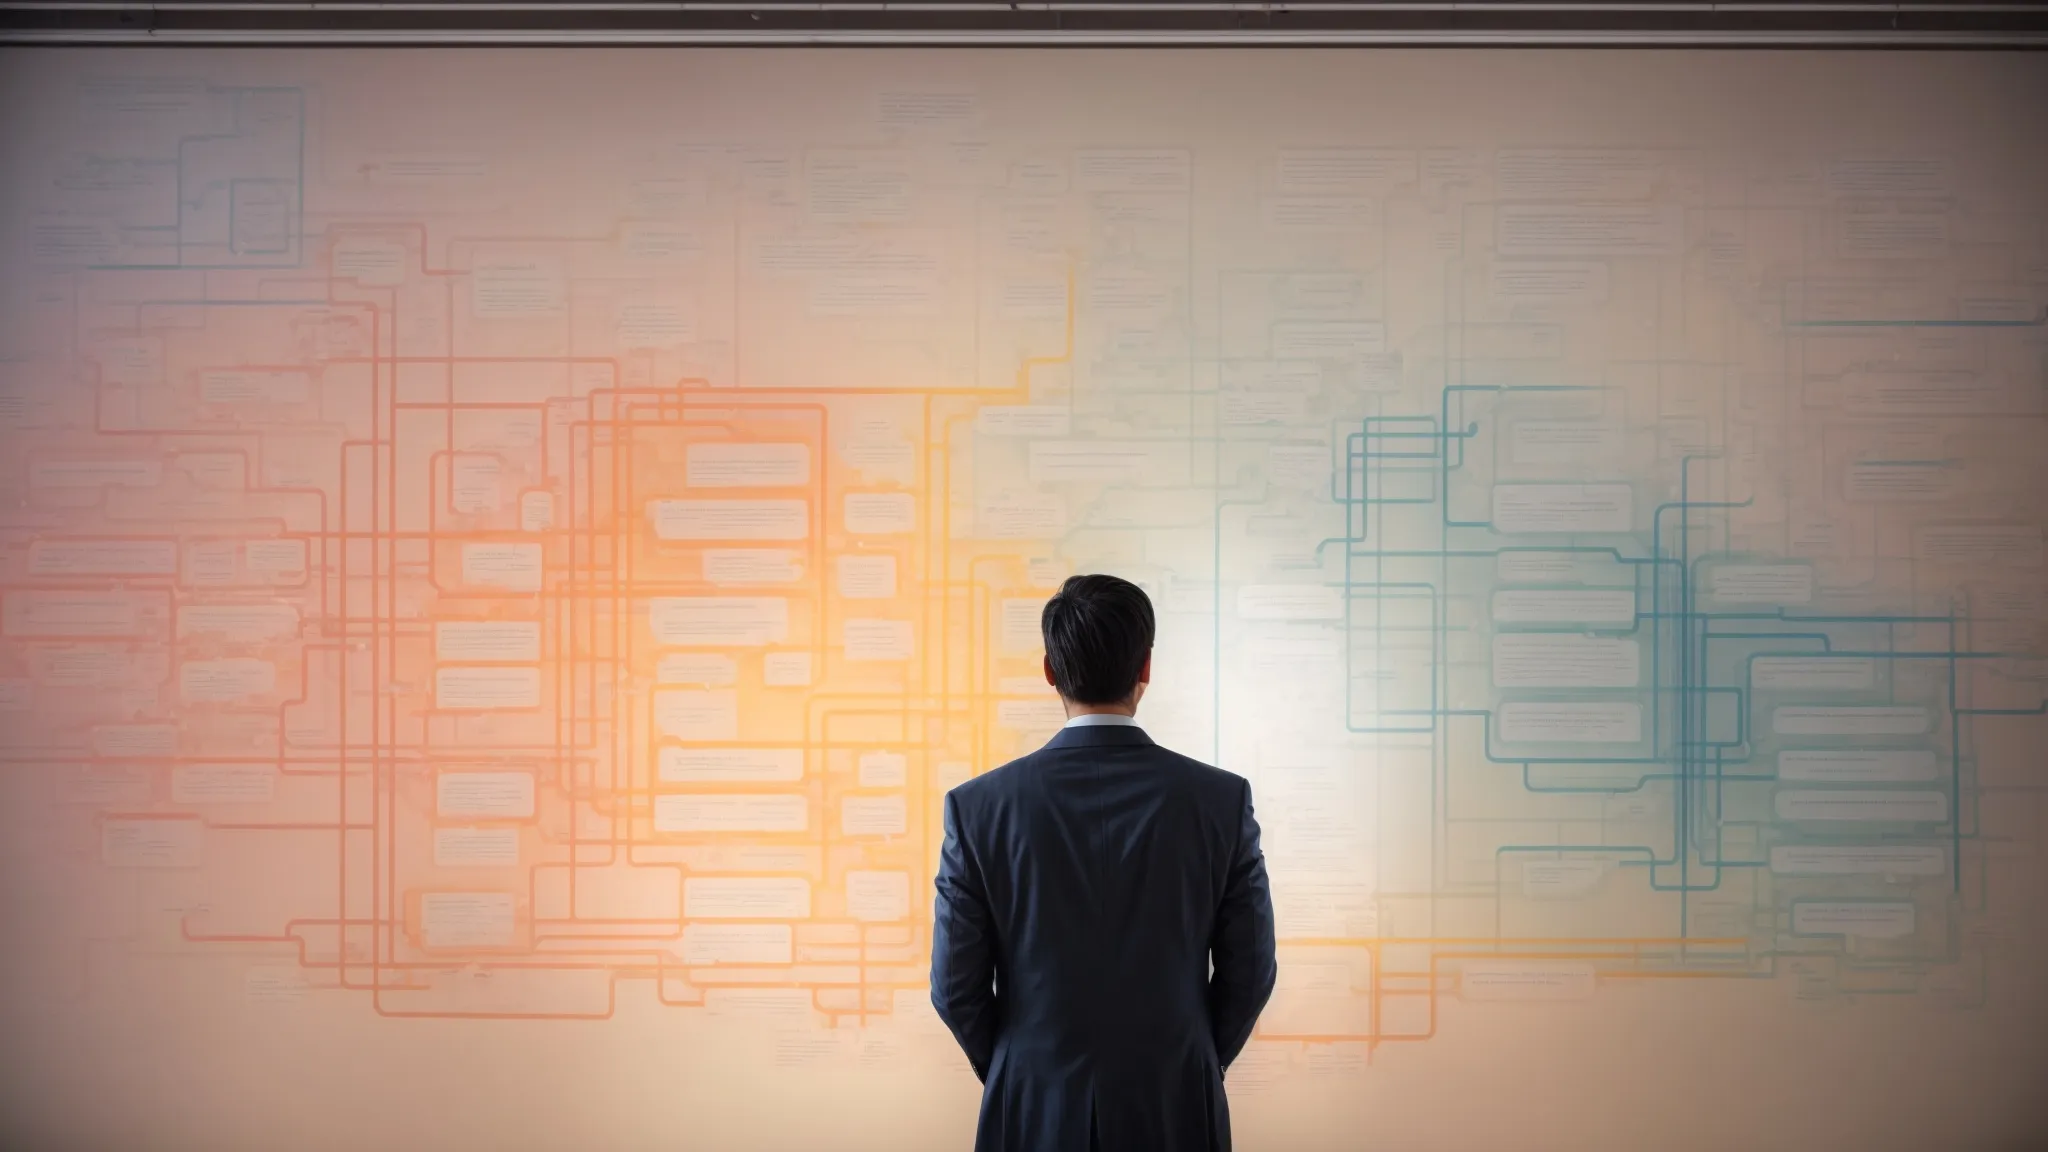 a person intently studying a large, colorful flowchart on a wall, illuminating the interconnected pathways of seo keyword optimization strategies.